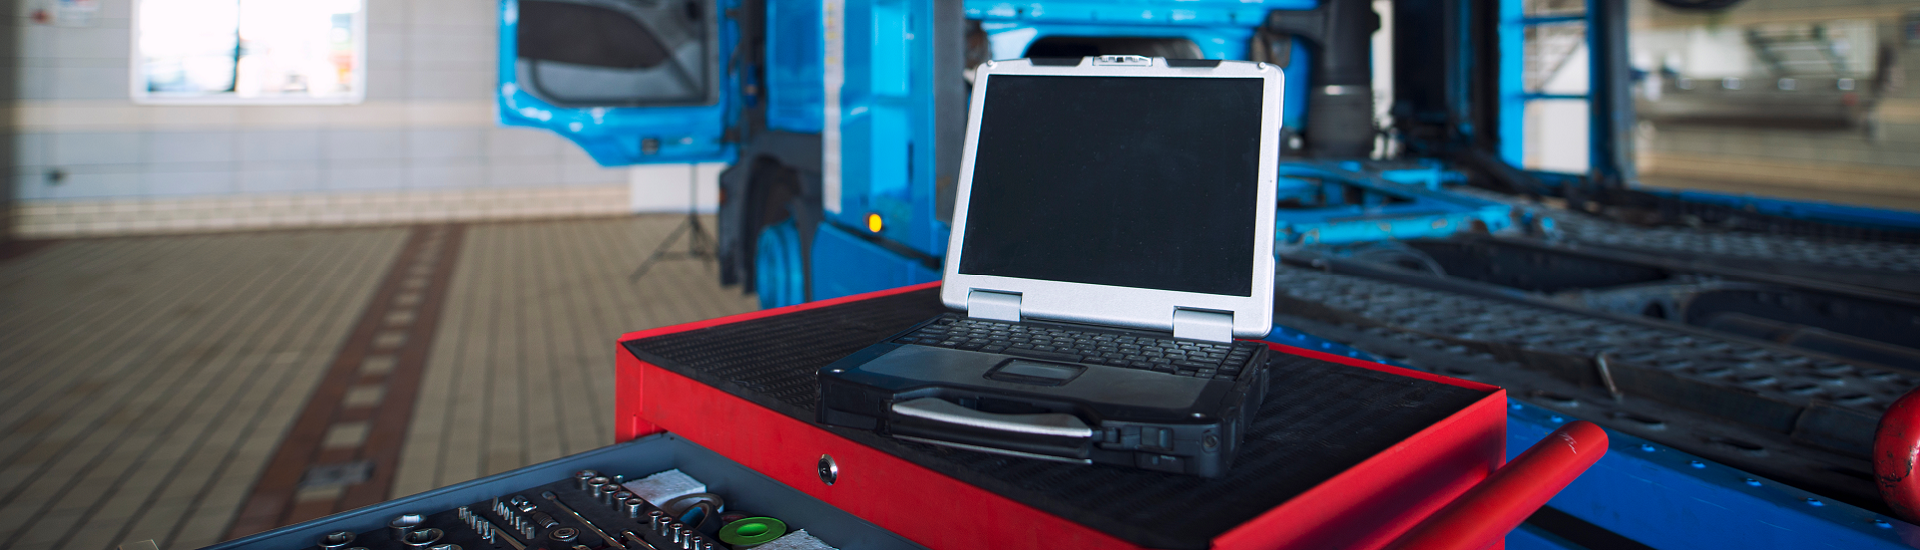 laptop at service point station for diagnostic of trucks